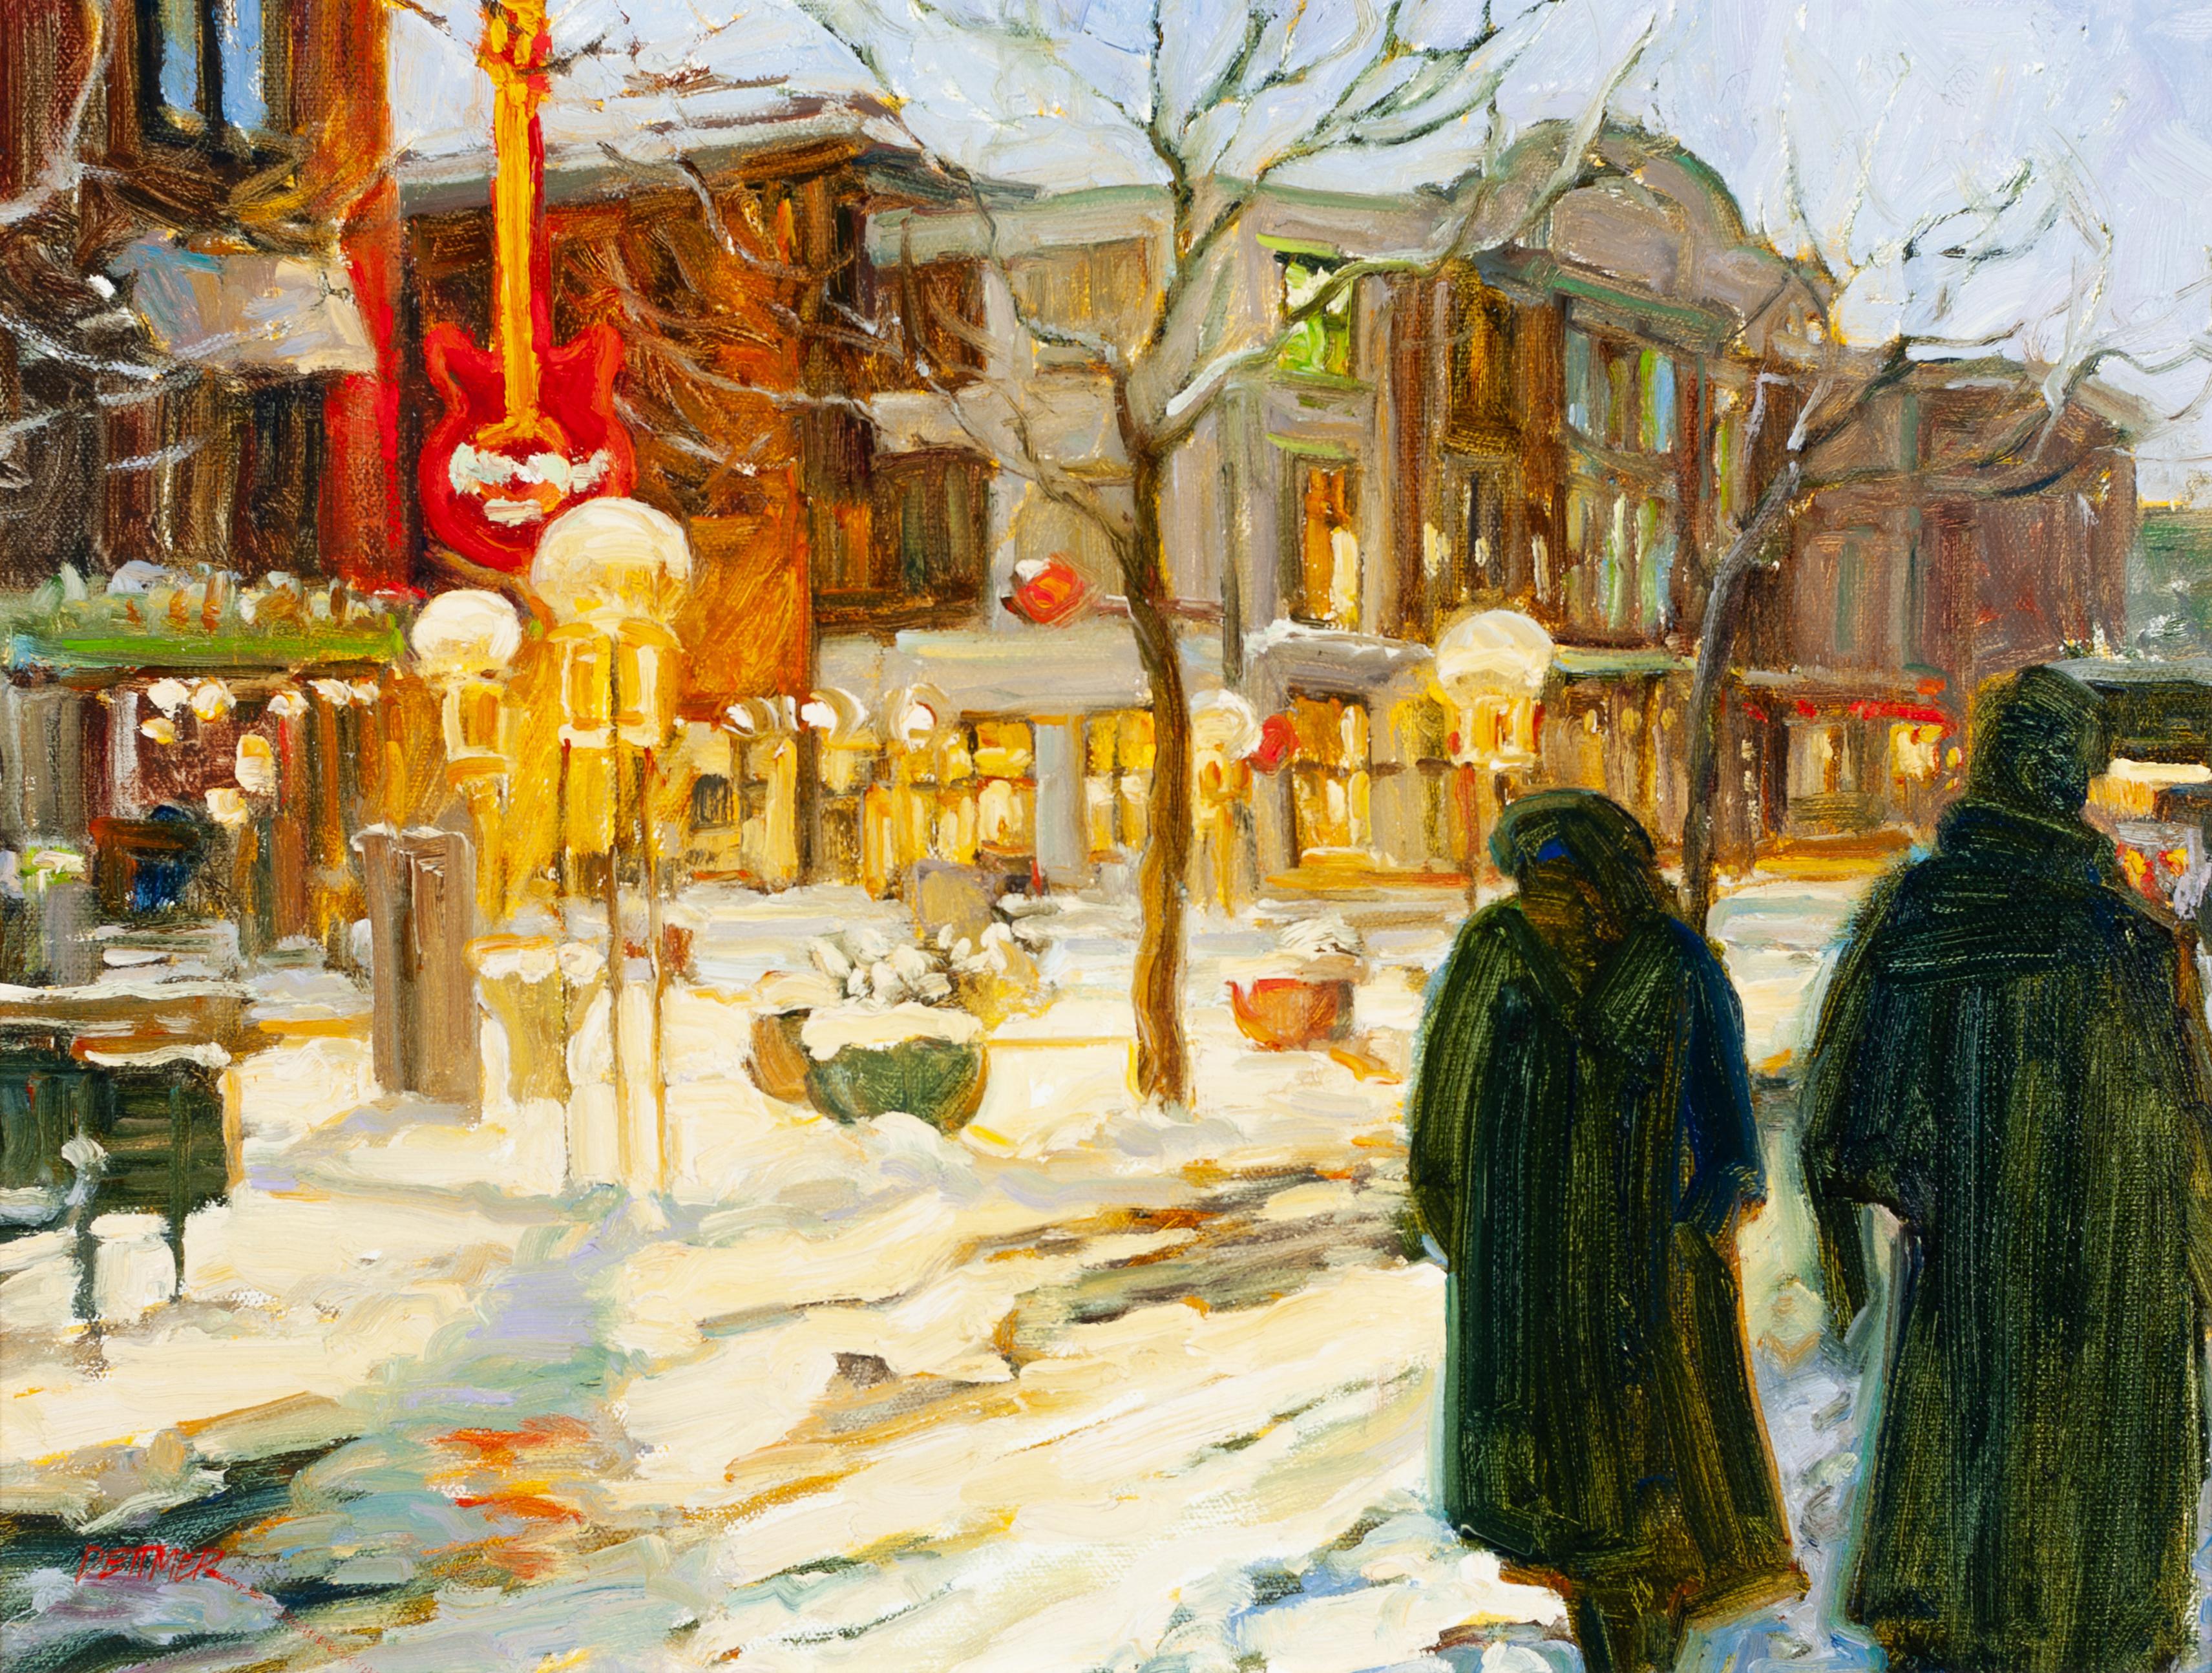 Snow on the Mall - Painting by Ann Dettmer